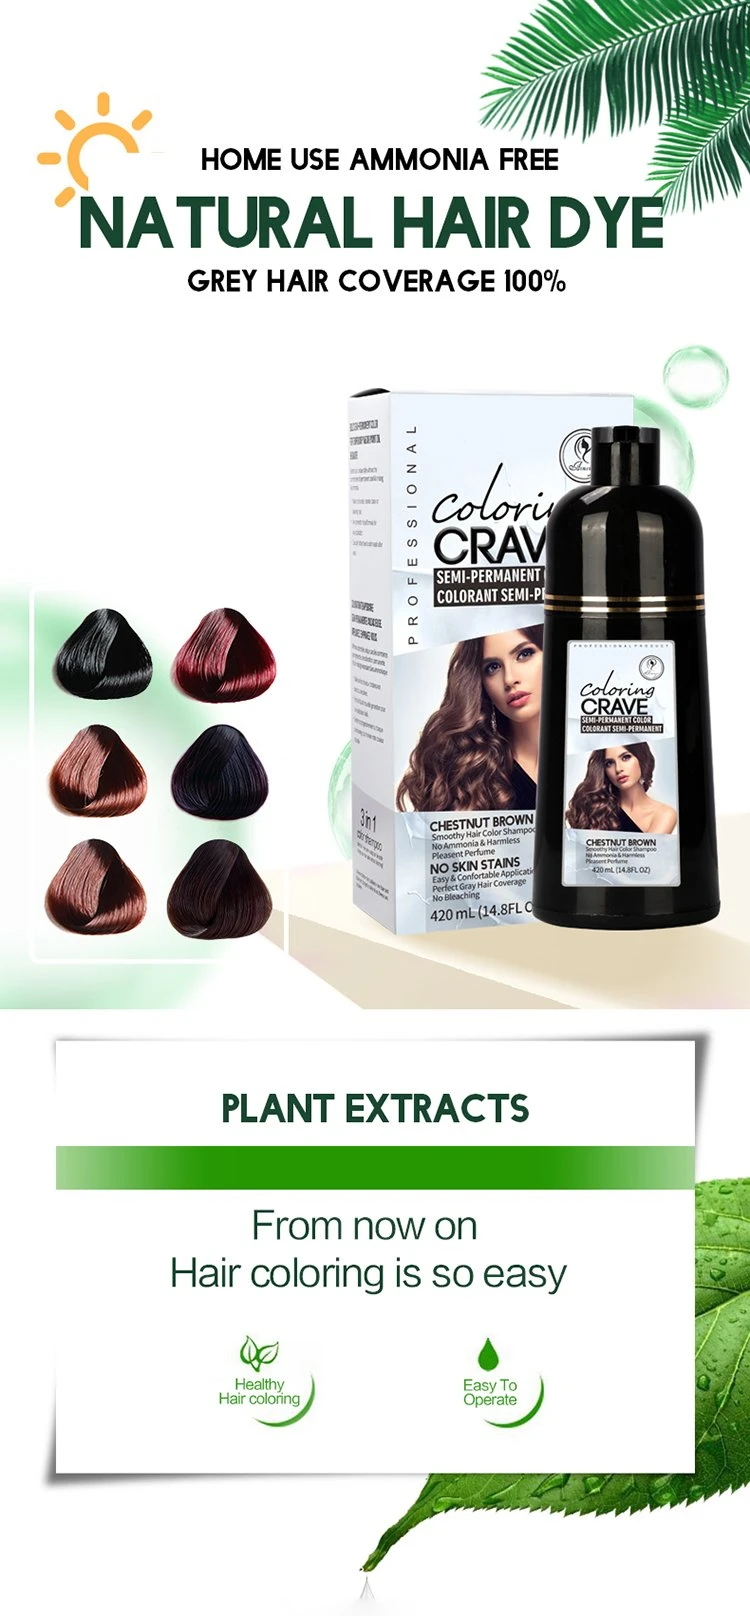 Instant Black Hair in 5 Minutes 99% Cover Grey Hair Natural Black Hair Color Shampoo